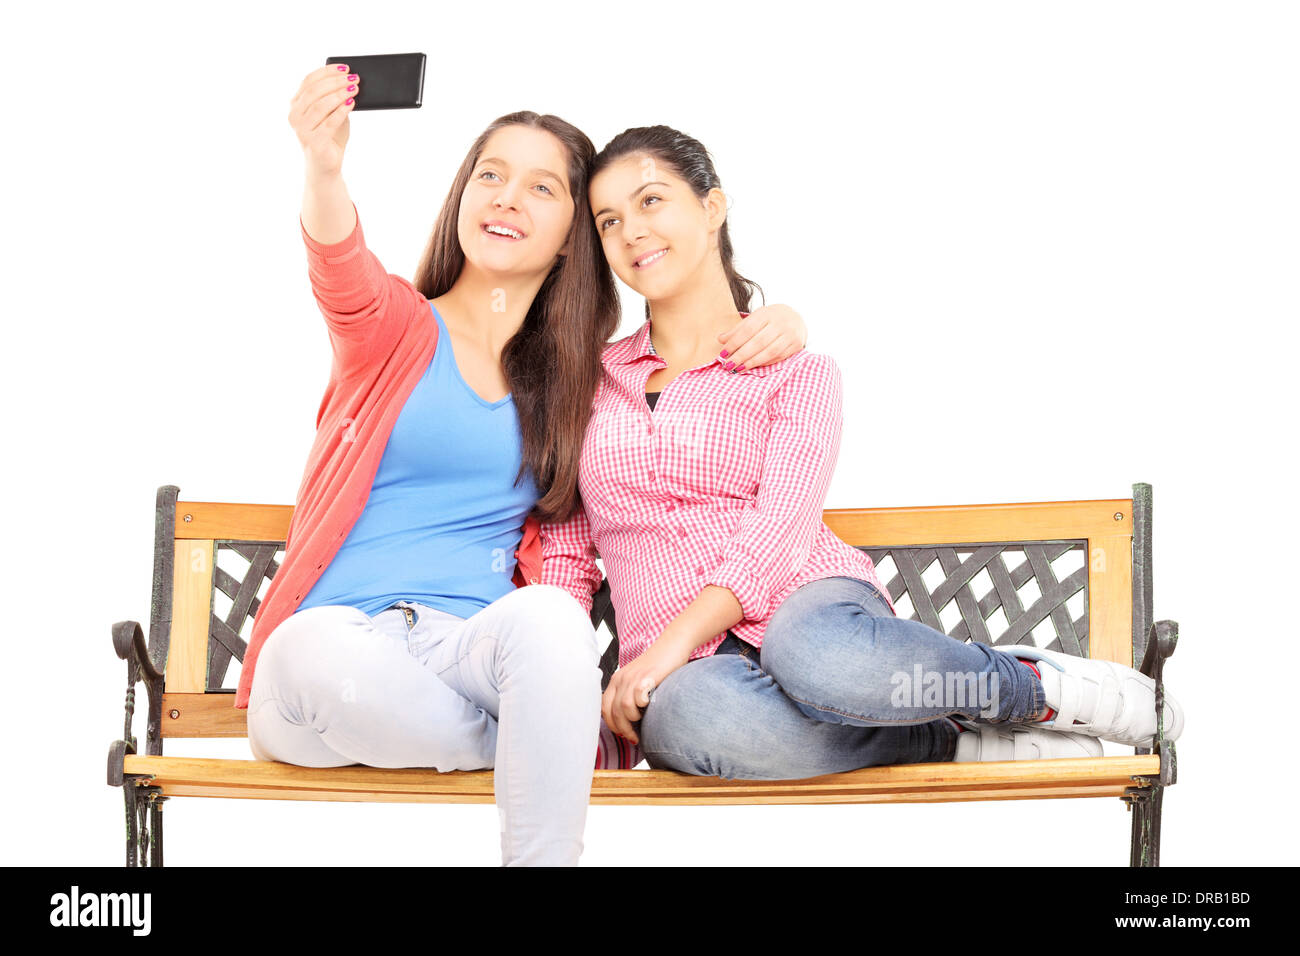 Two young girls seated on bench taking picture of themselves with cell phone Stock Photo